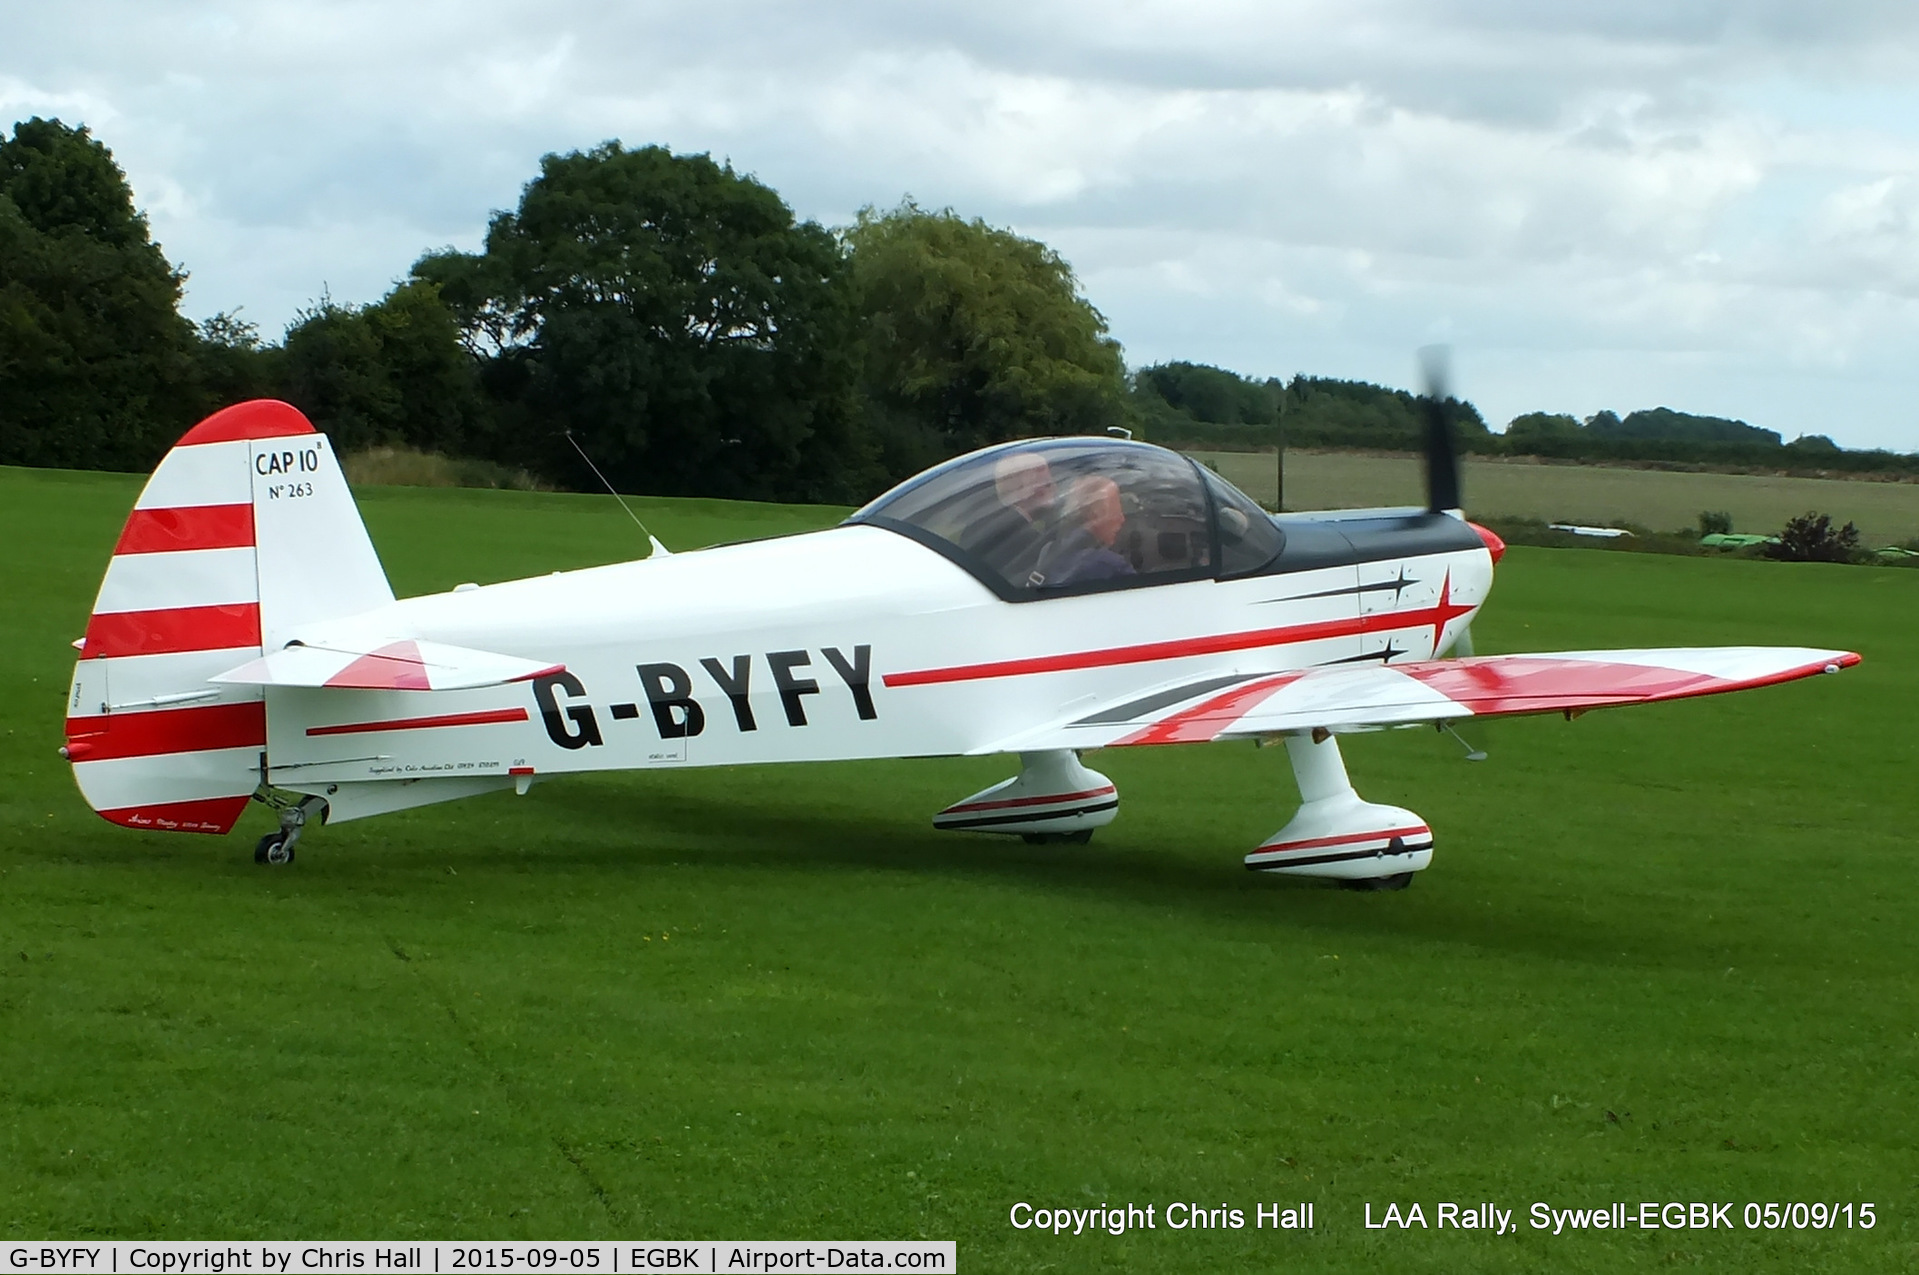 G-BYFY, 1992 Mudry CAP-10B C/N 263, at the LAA Rally 2015, Sywell